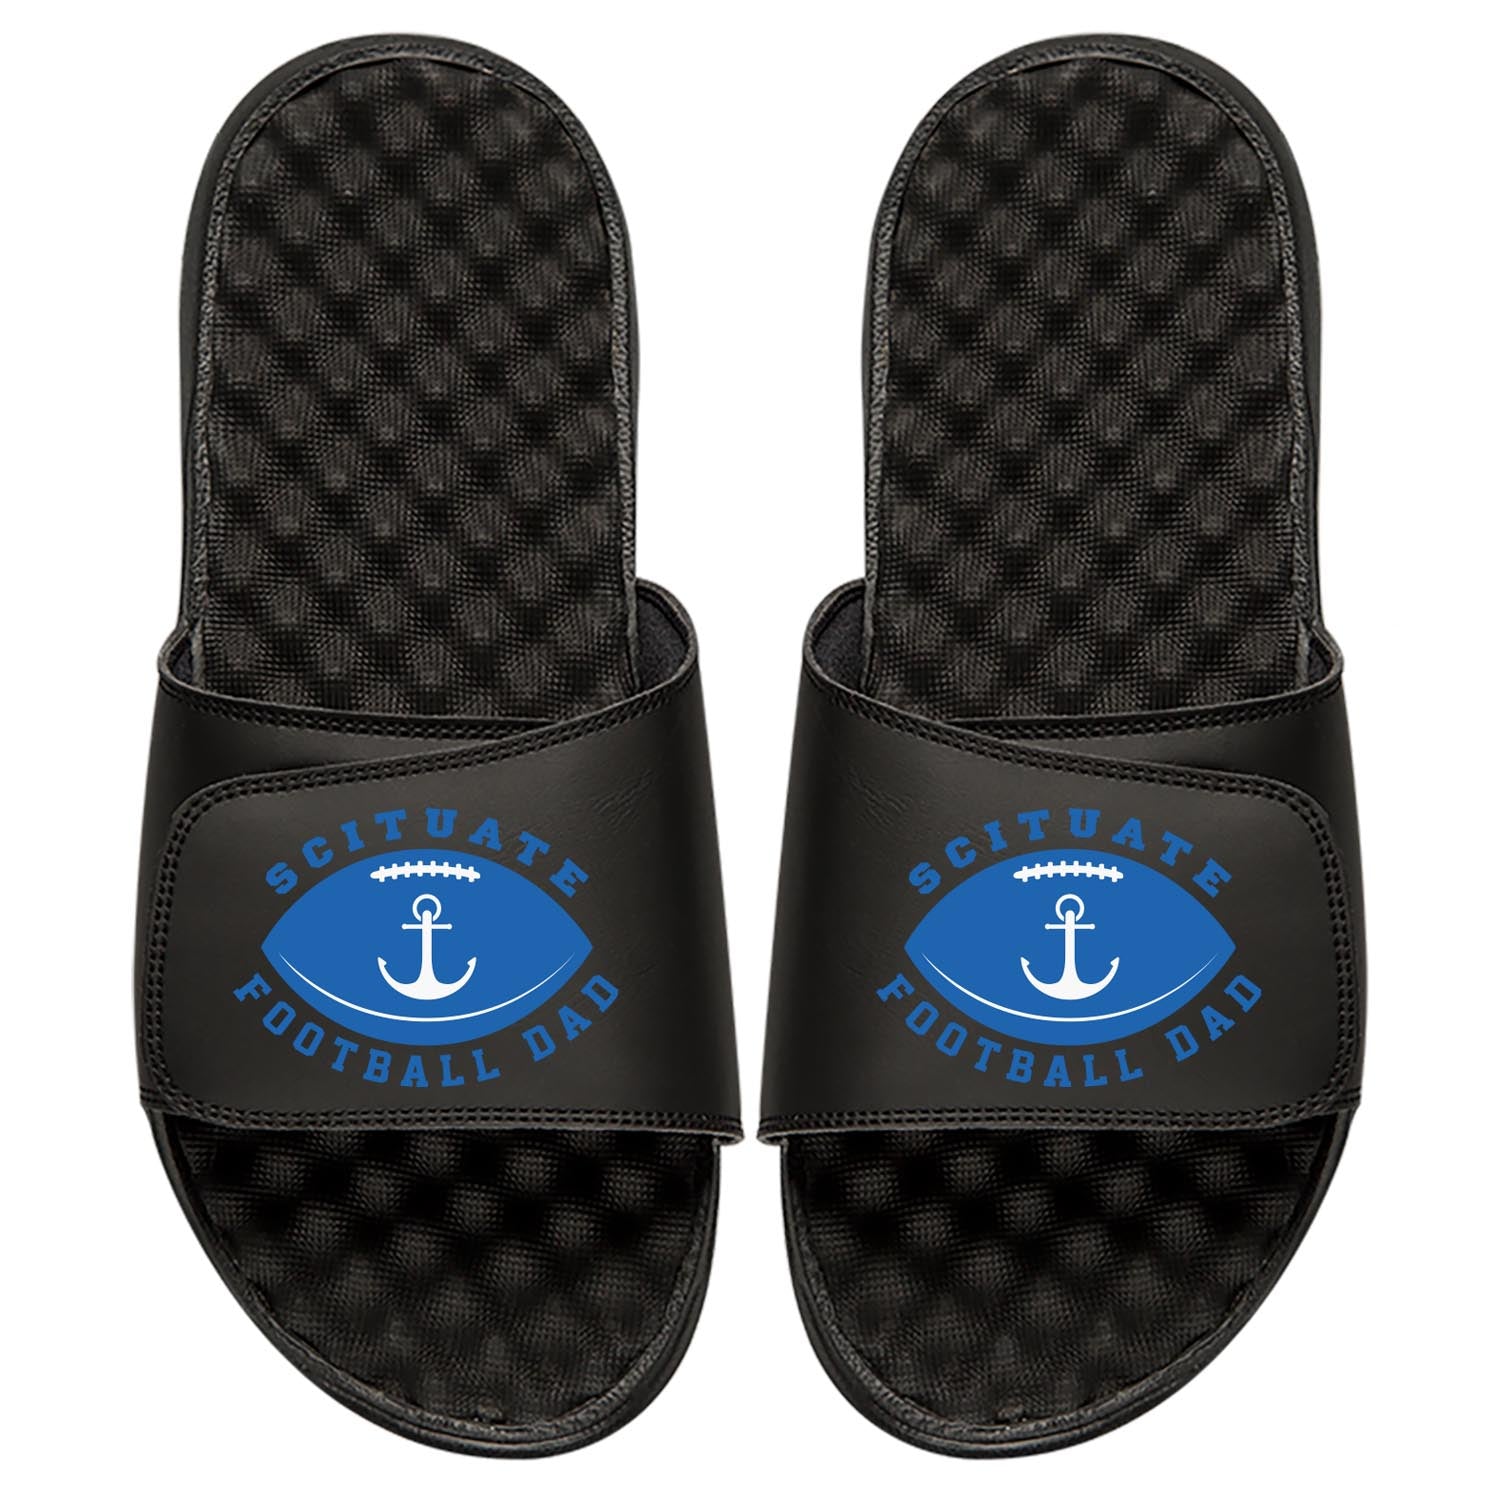 Scituate Football Dad Slides